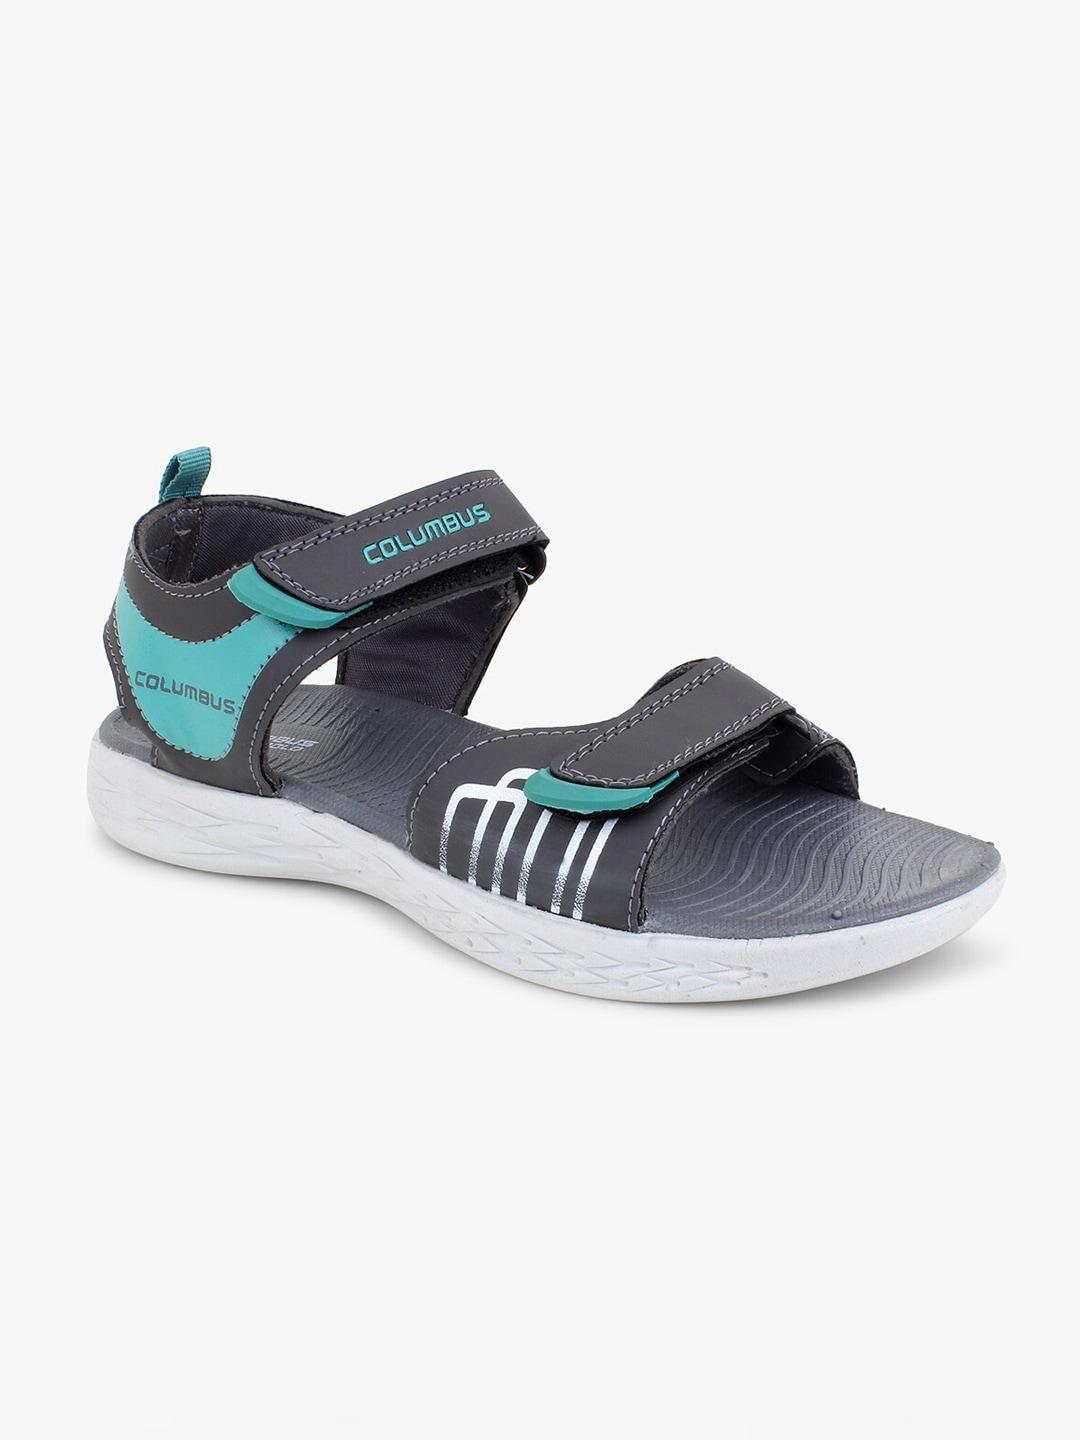 Columbus Men Grey & Blue Solid Synthetic Sports Sandals